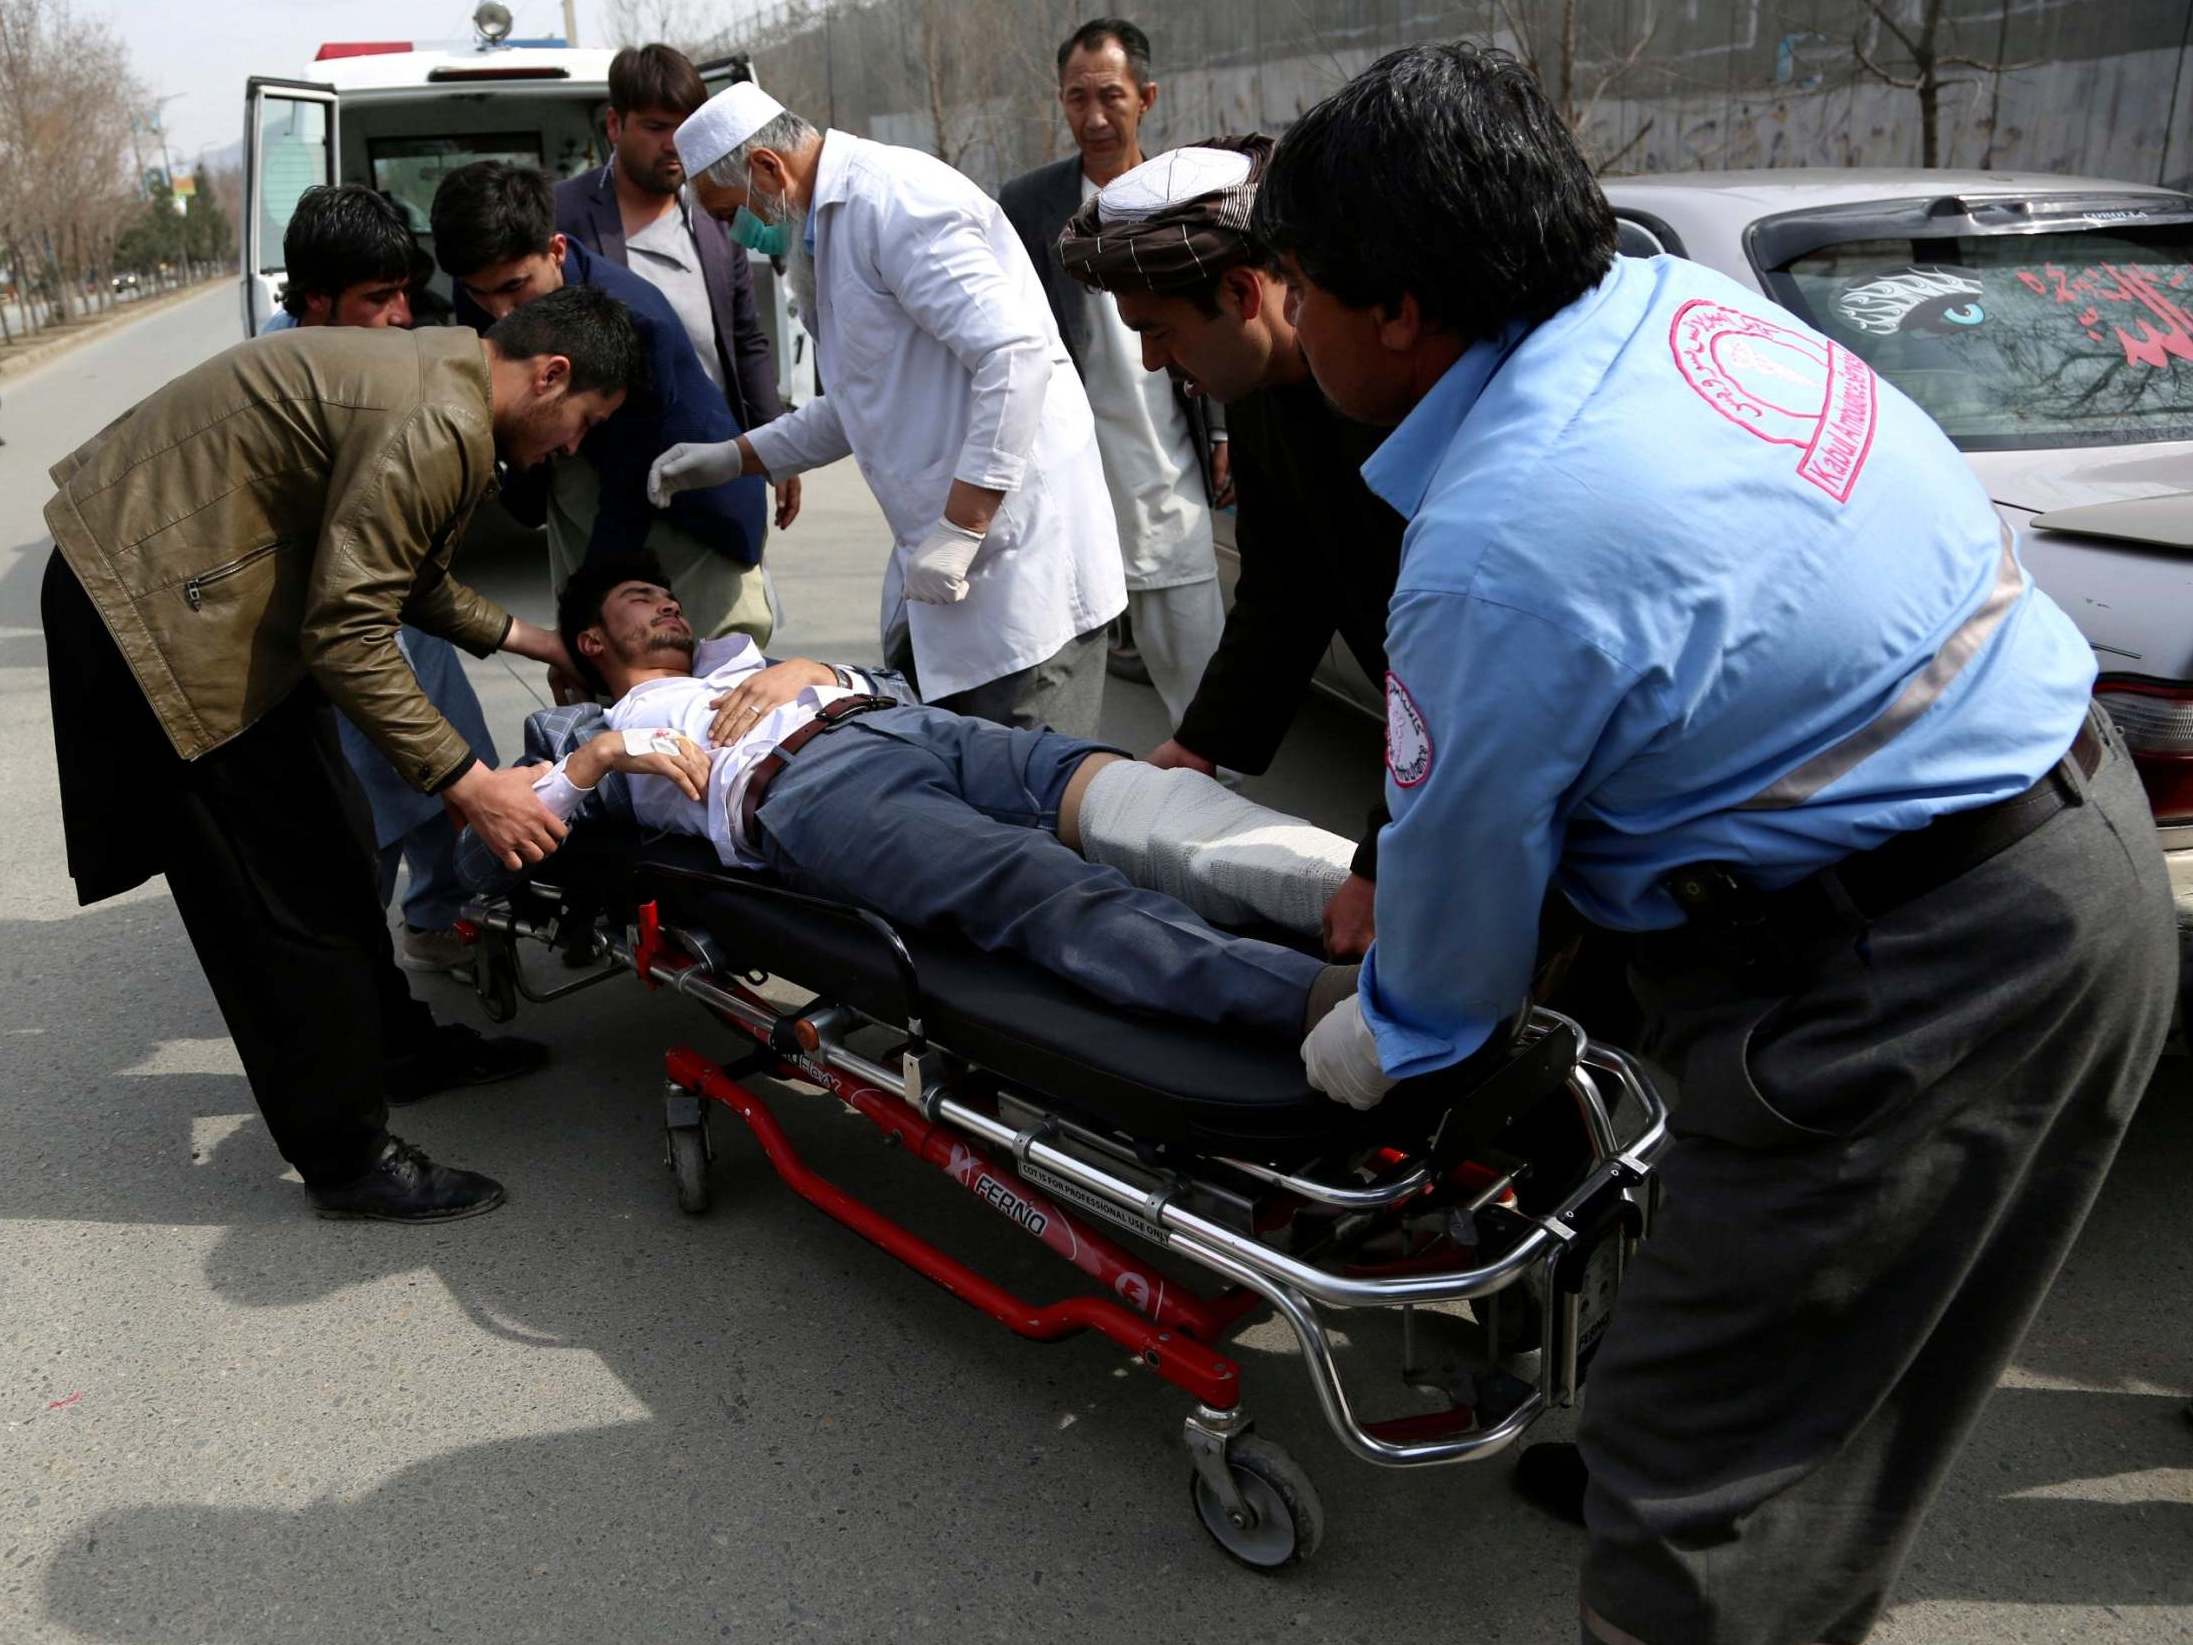 An injured man is carried into an ambulance after the attack in Kabul